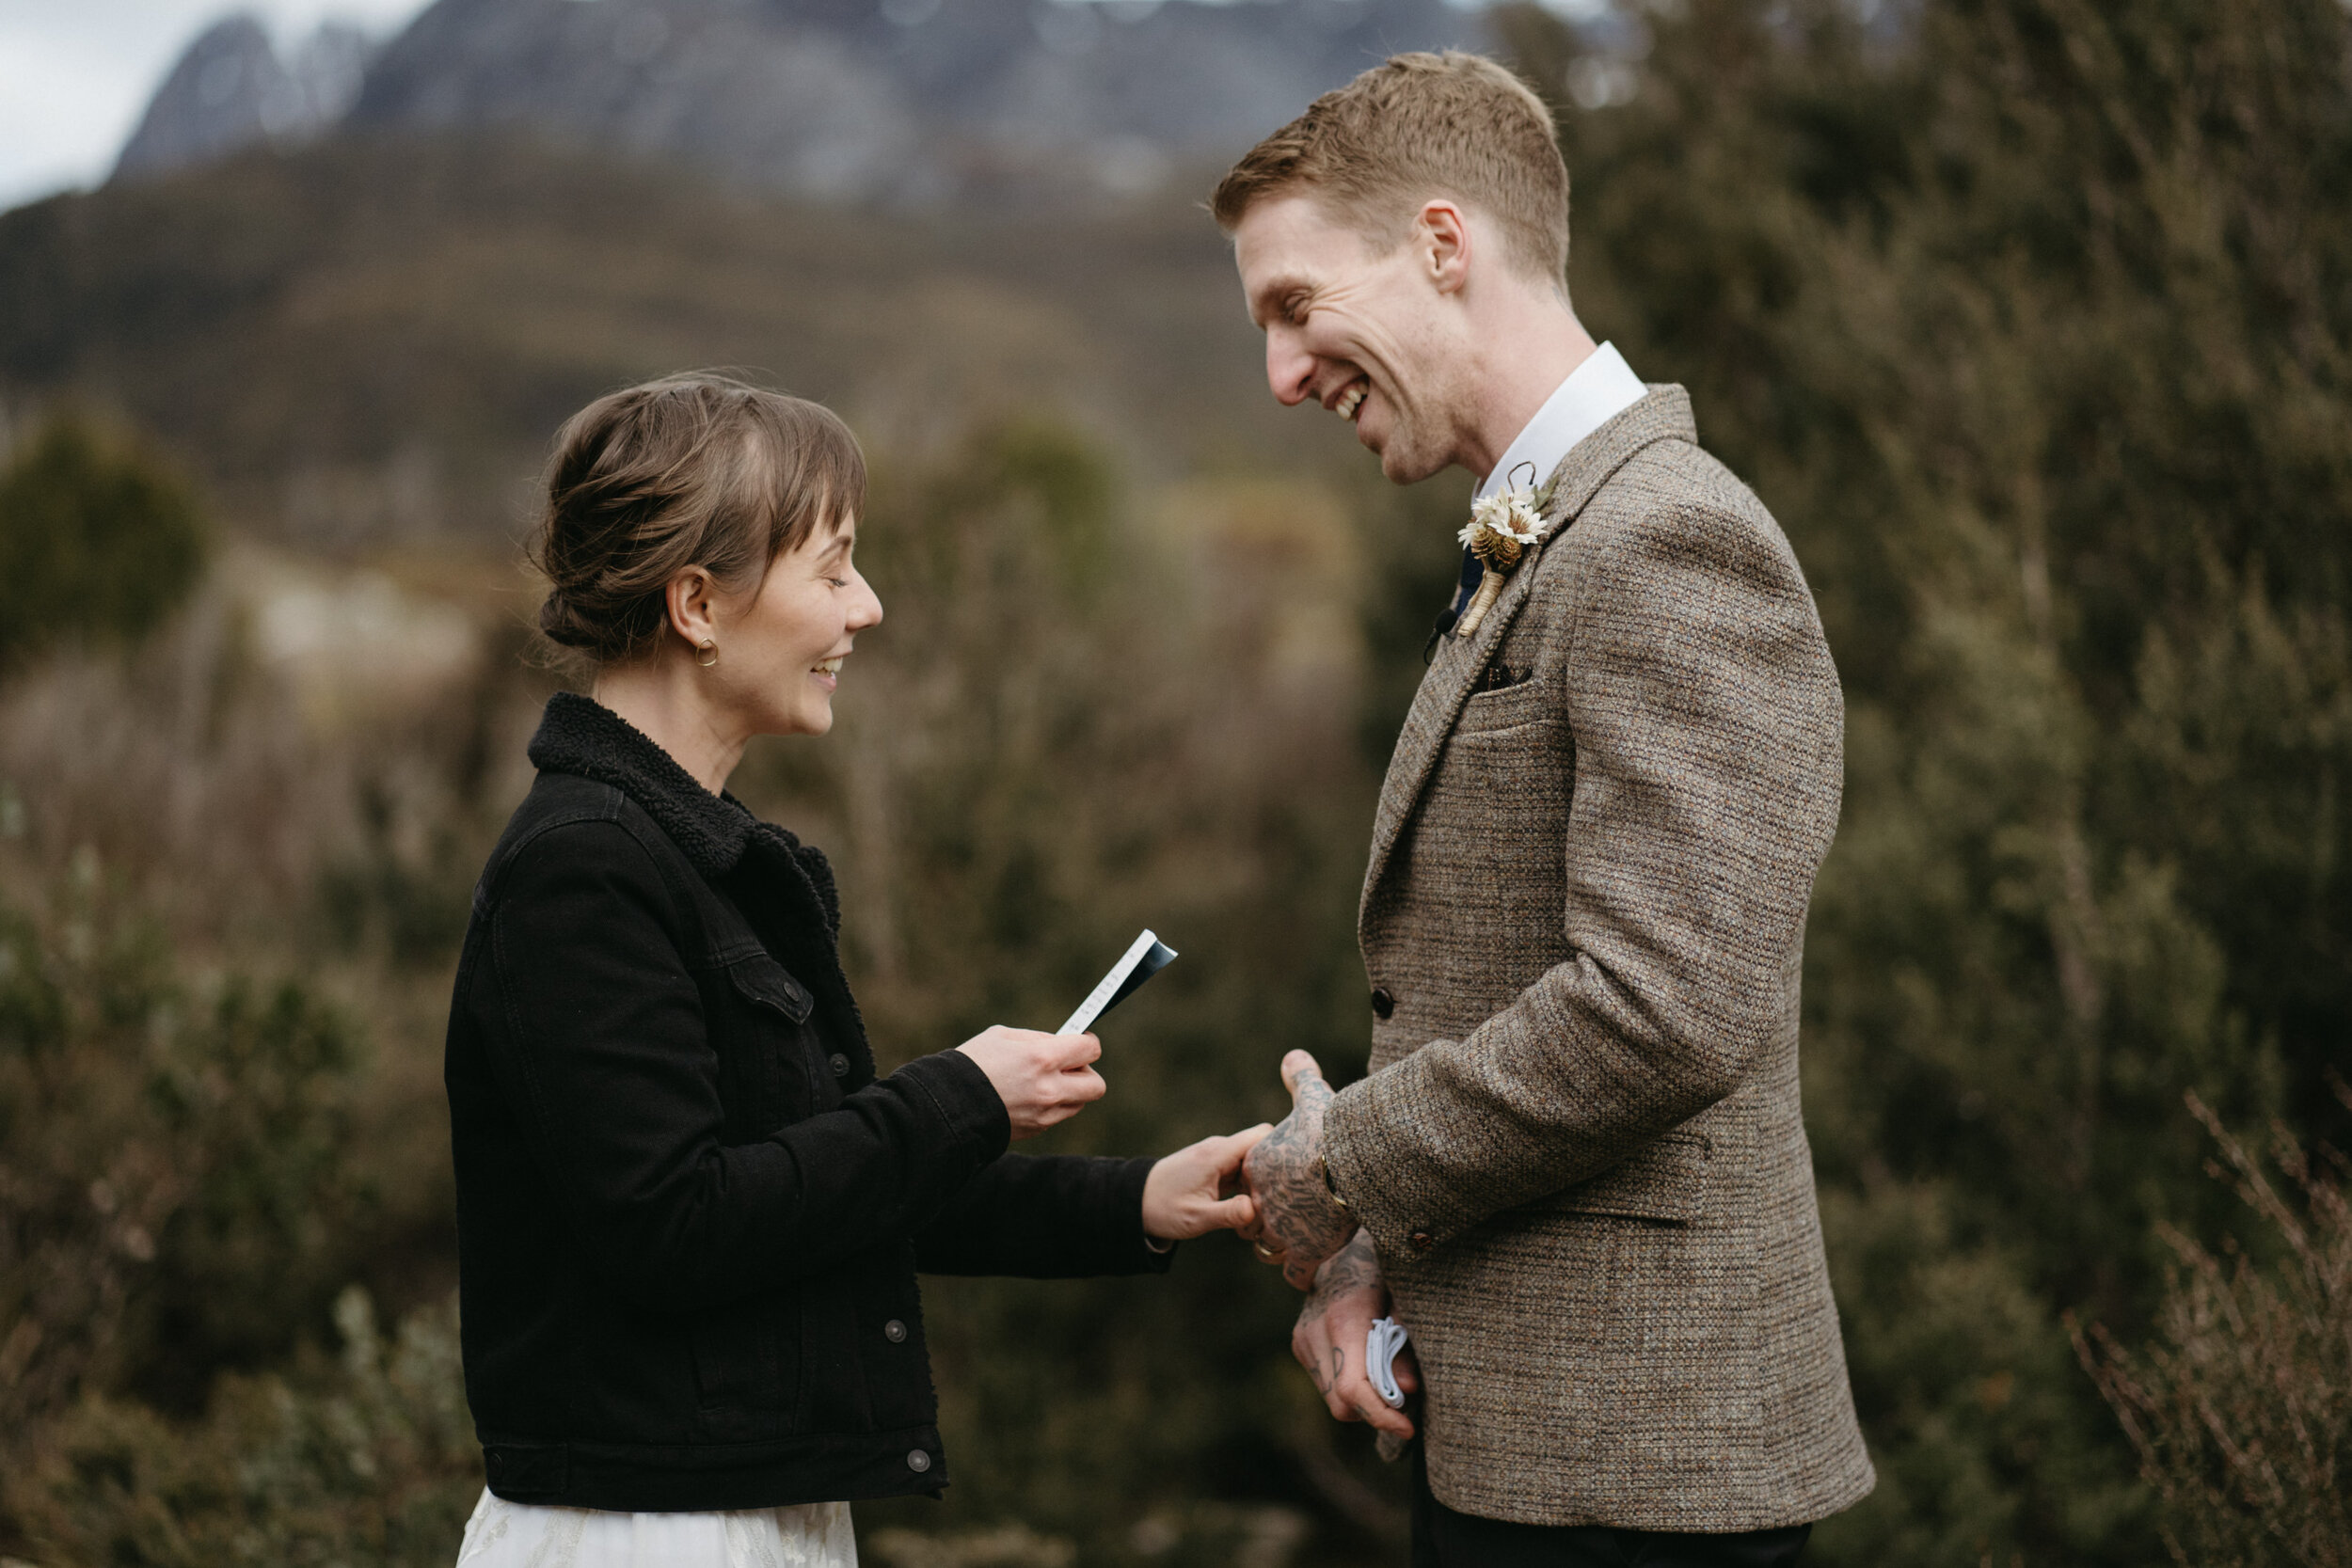 Todd and Sarah - Tasmania Elopement - Trent and Jessie Wedding Photography and Videography